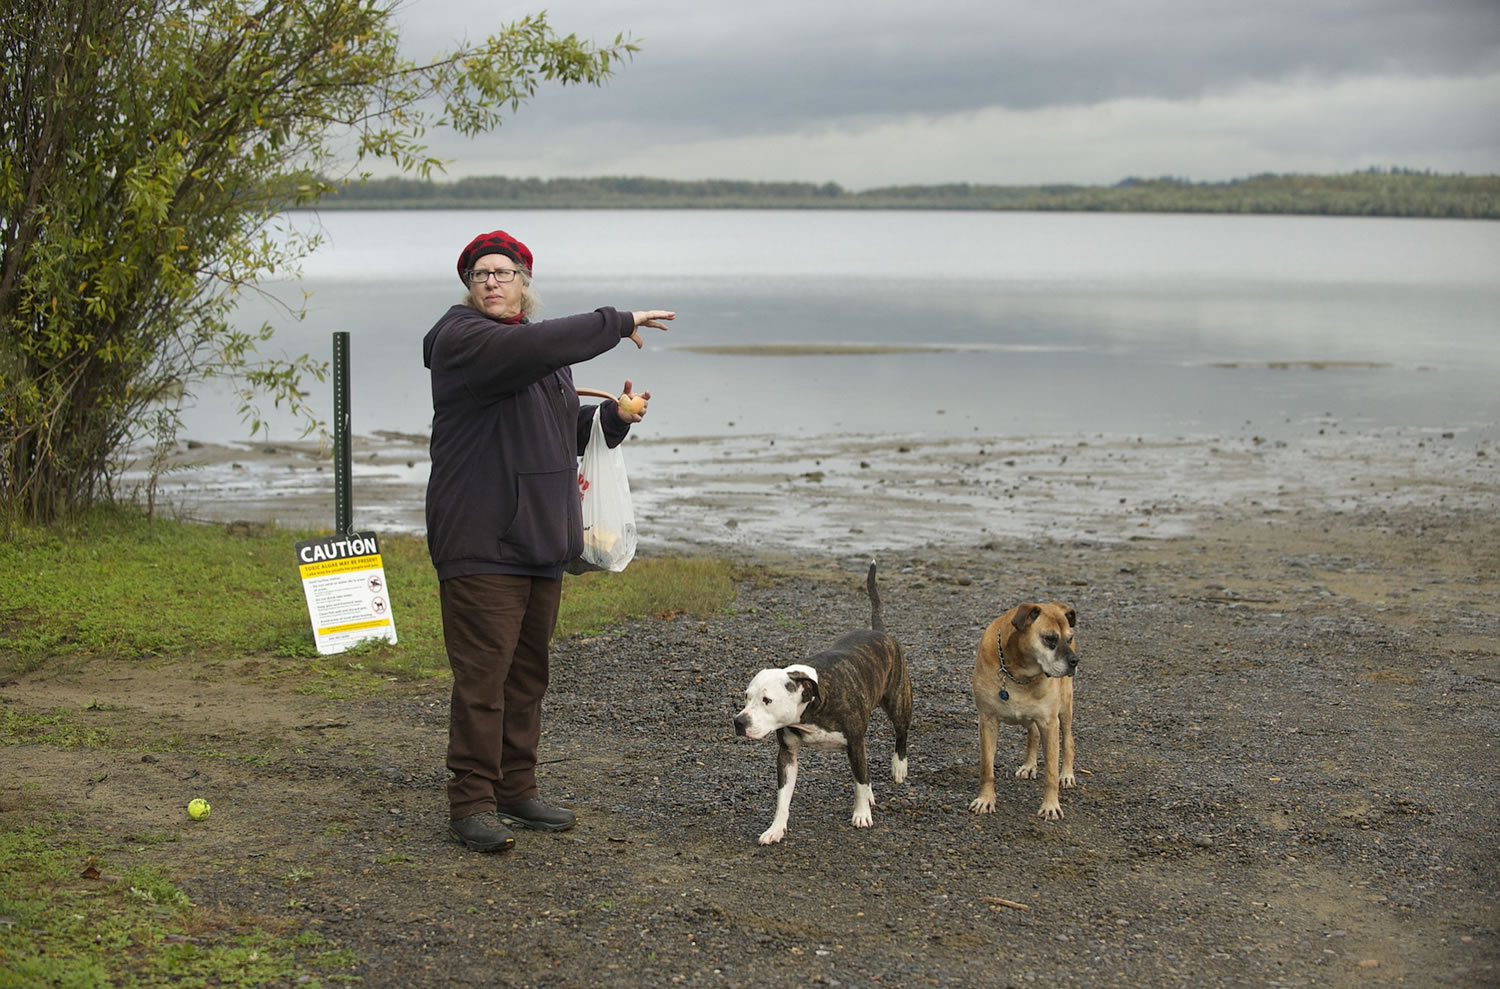 Vancouver resident Julia Rosenstein is a frequent visitor to the Shillapoo Wildlife Area near Vancouver Lake.